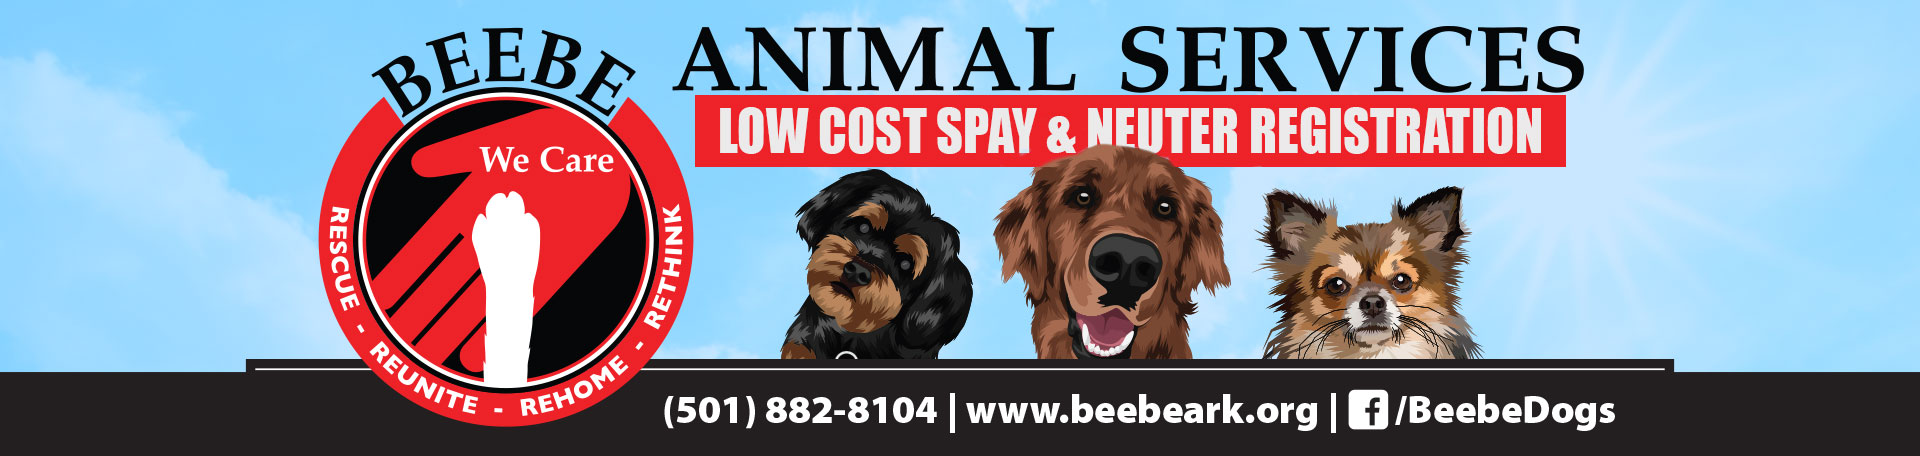 Beebe Animal Services